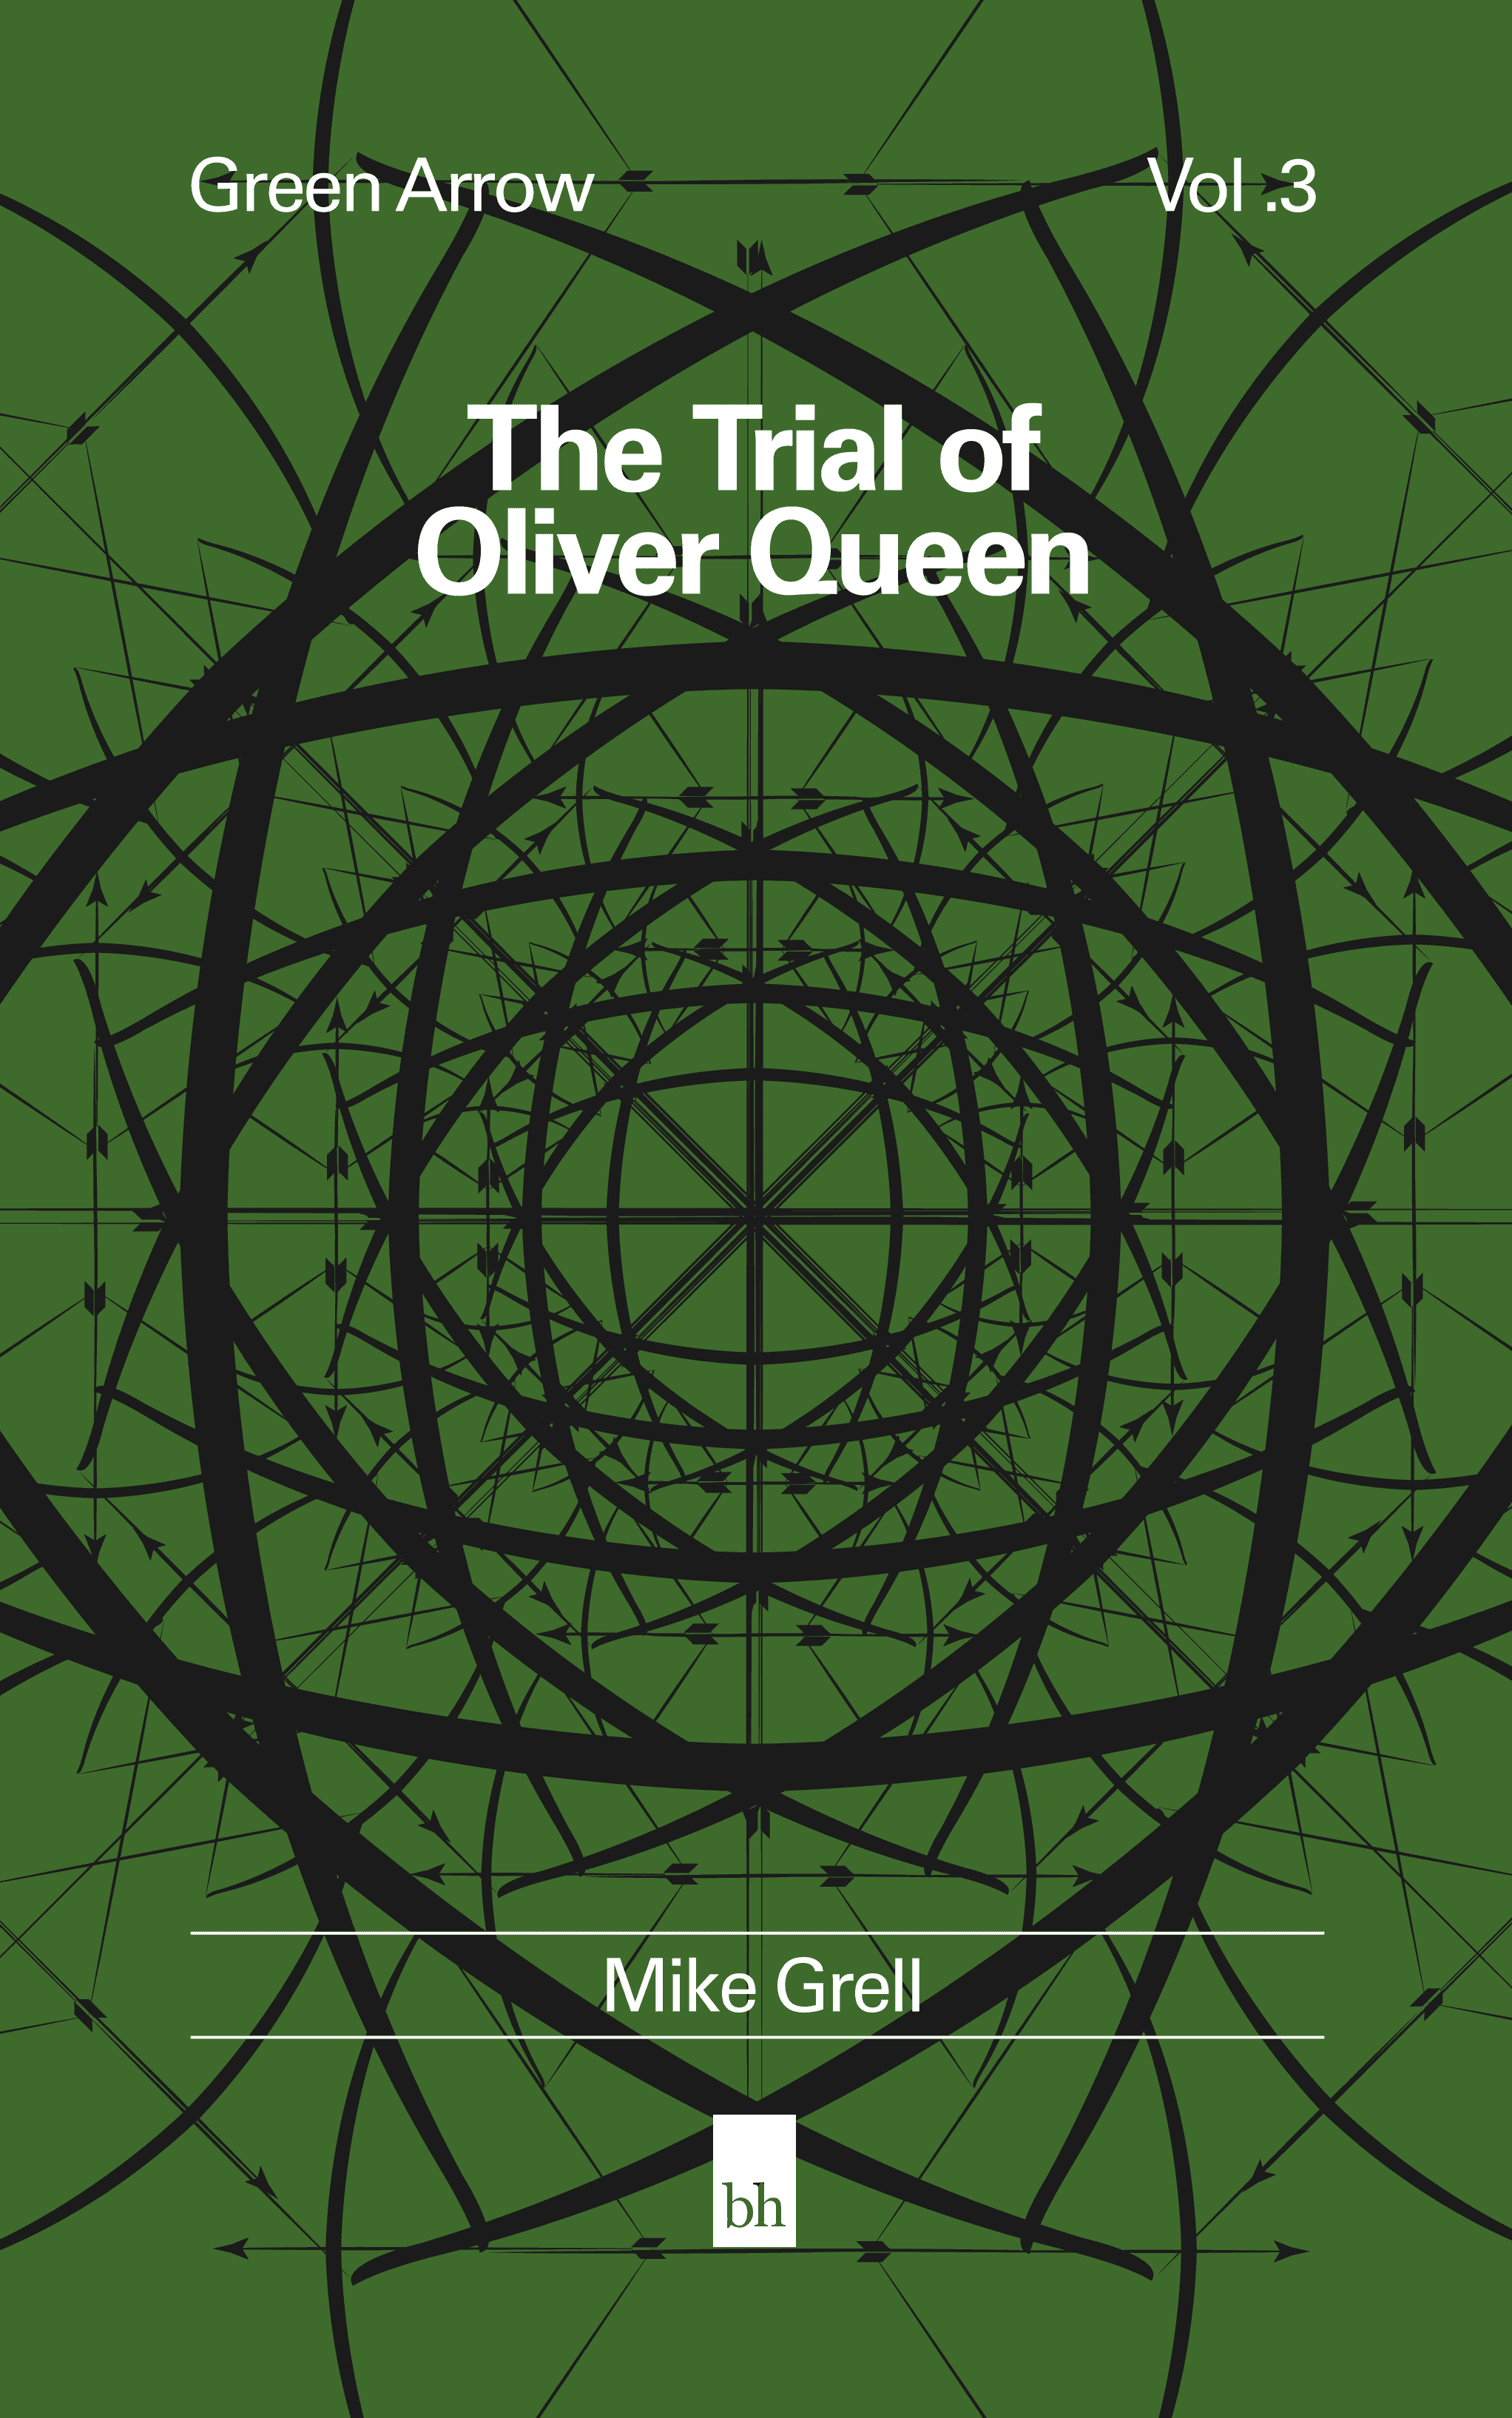 Book cover mock thumbnail for Green Arrow Vol. 3: The Trial of Oliver Queen